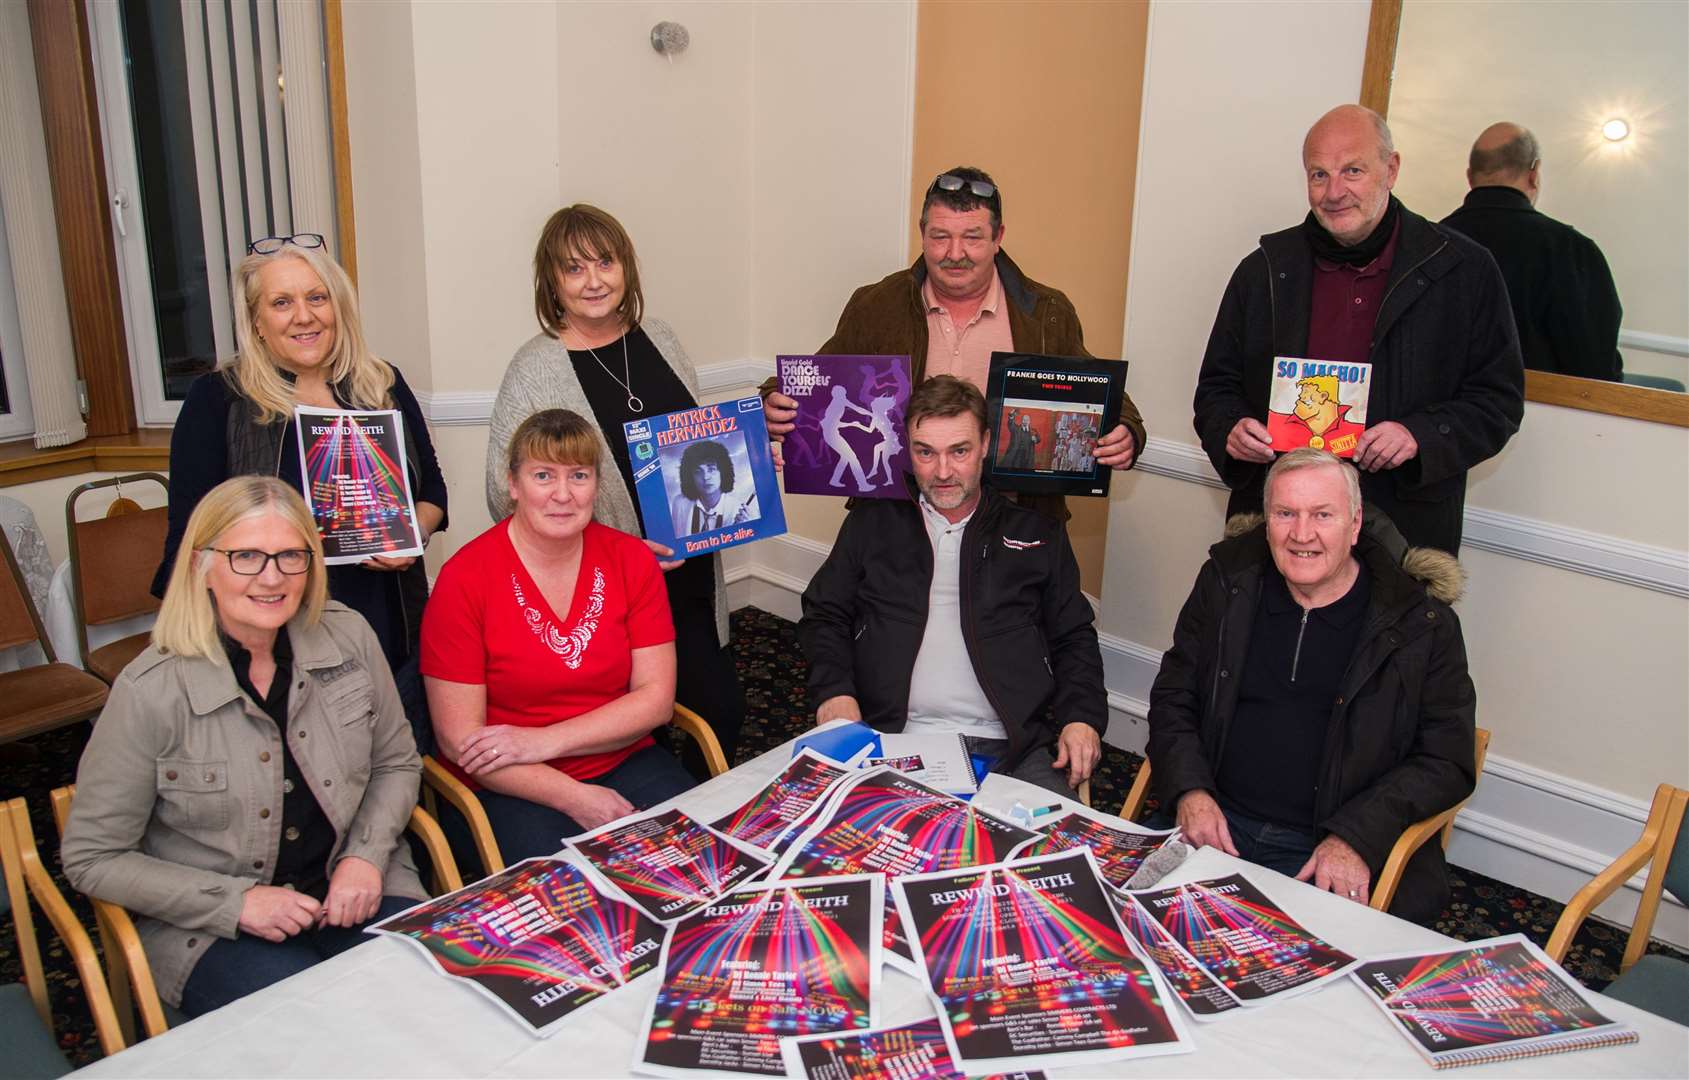 Organisers and supporters of Rewind Keith, (from left) Brenda Law, Hazel Lawson, Gillian Shivas, Mhorag McKenzie, Simon Tees (seated), Ronnie Taylor, Dan McLaren of Sunset (seated), and Cammy Campbell. Picture: Becky Saunderson.